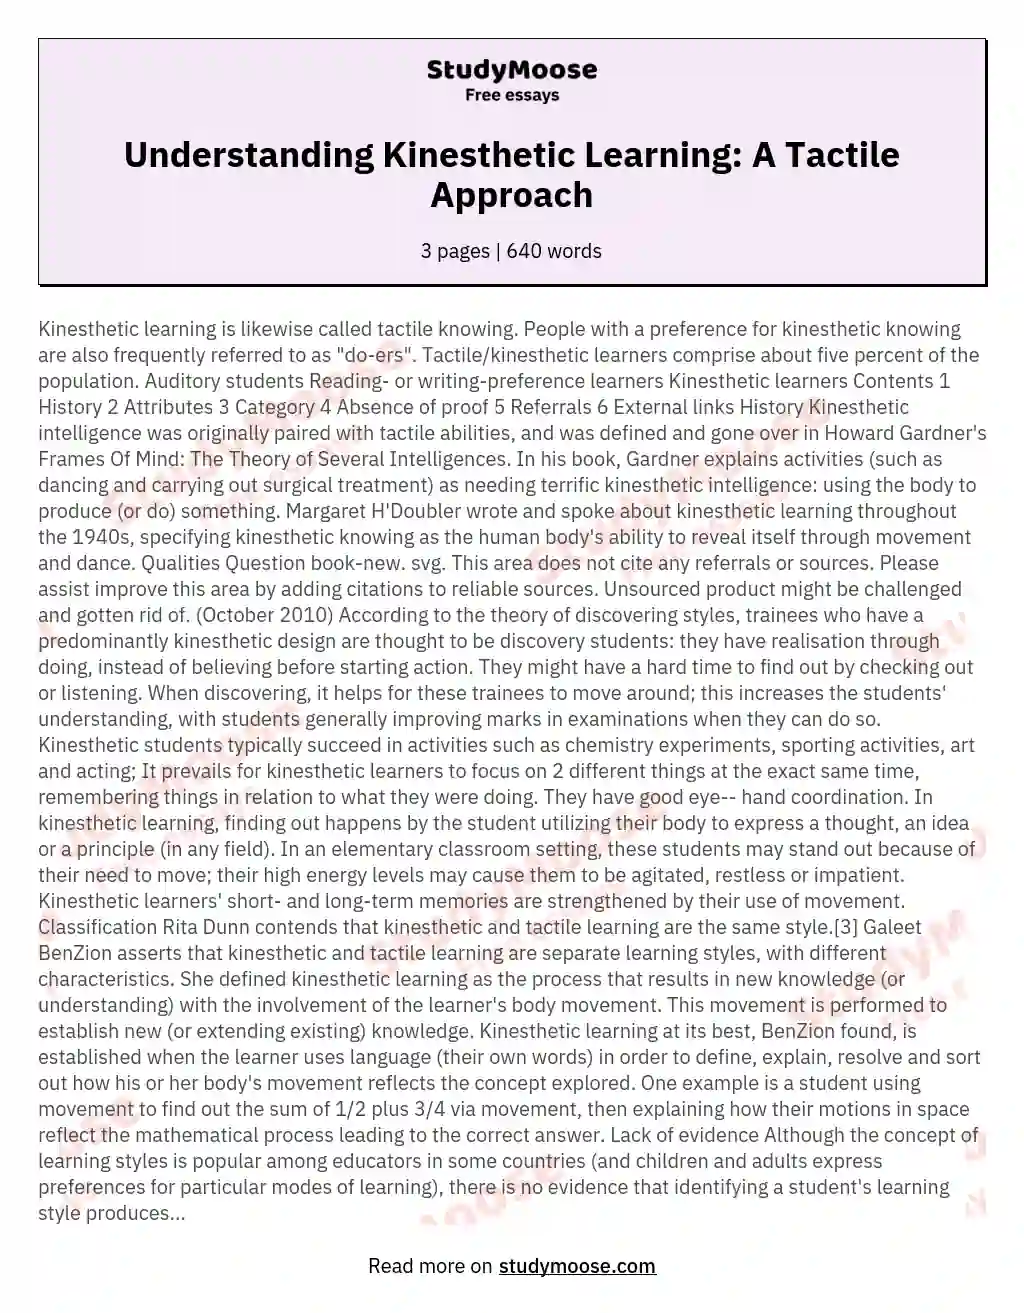 Understanding Kinesthetic Learning: A Tactile Approach essay